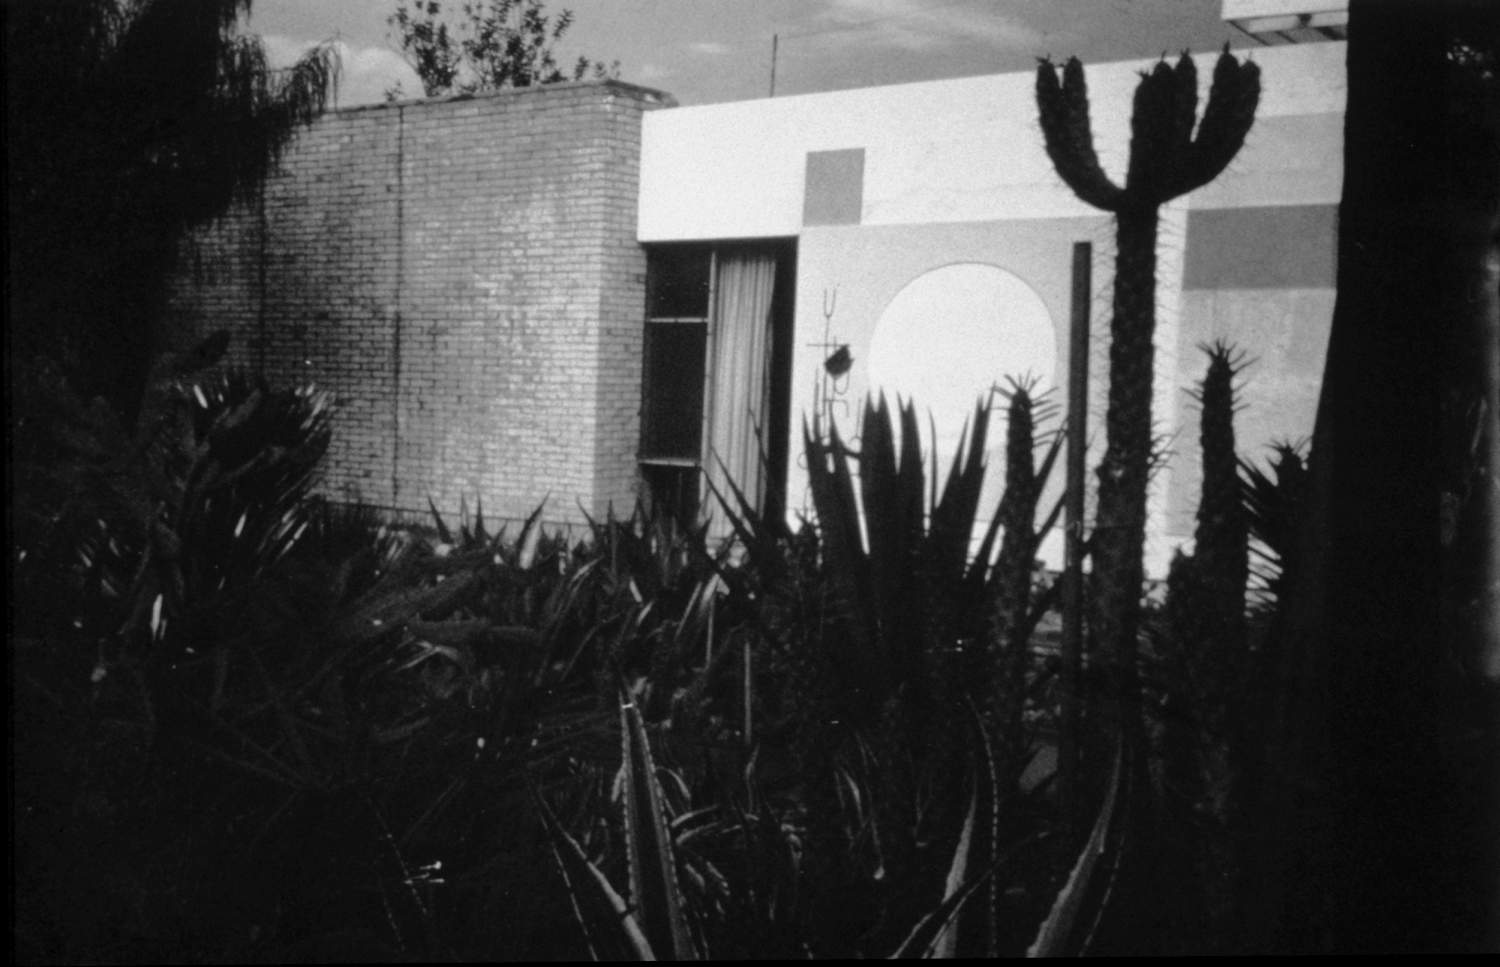 <p>View of front wall with Ben Nicholson mural behind the cactus garden.</p>